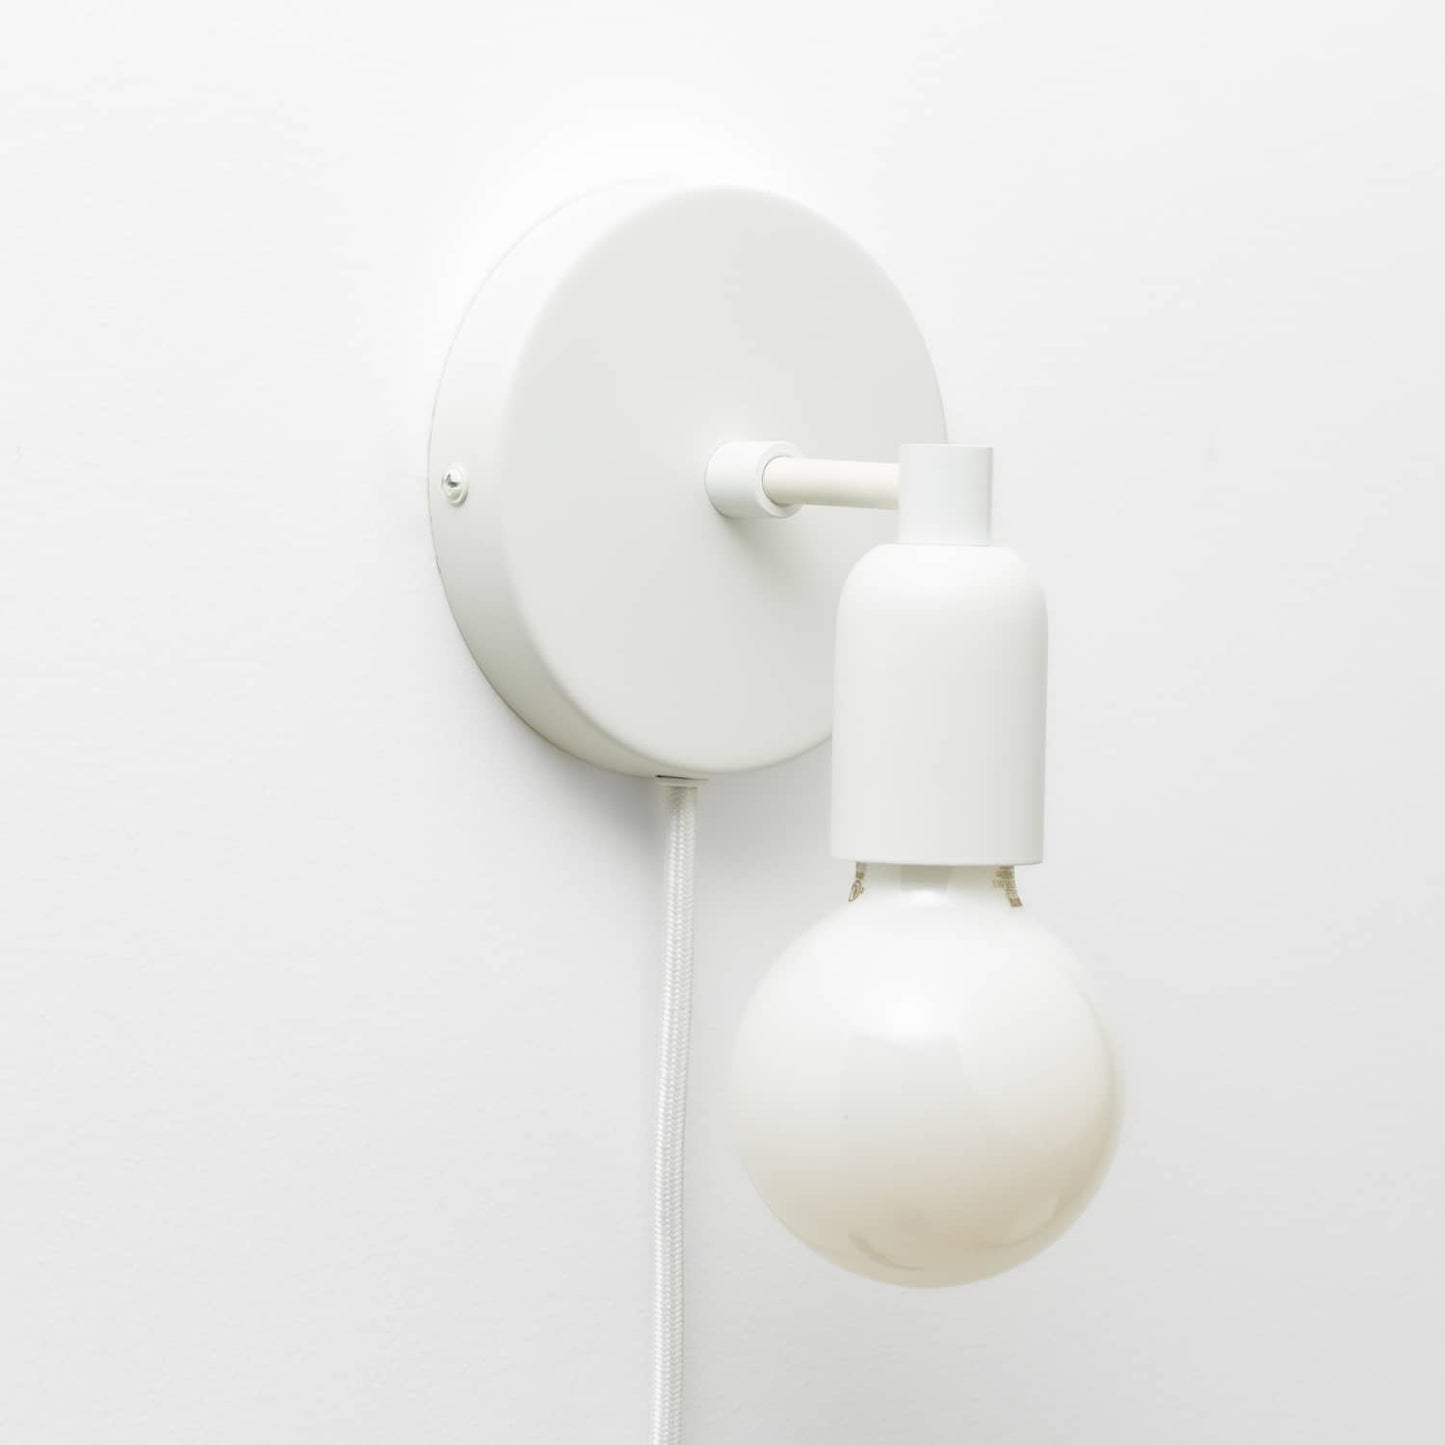 Junction Mini Solo Plug-In Sconce in Matte White finish pictured with G25 light bulb